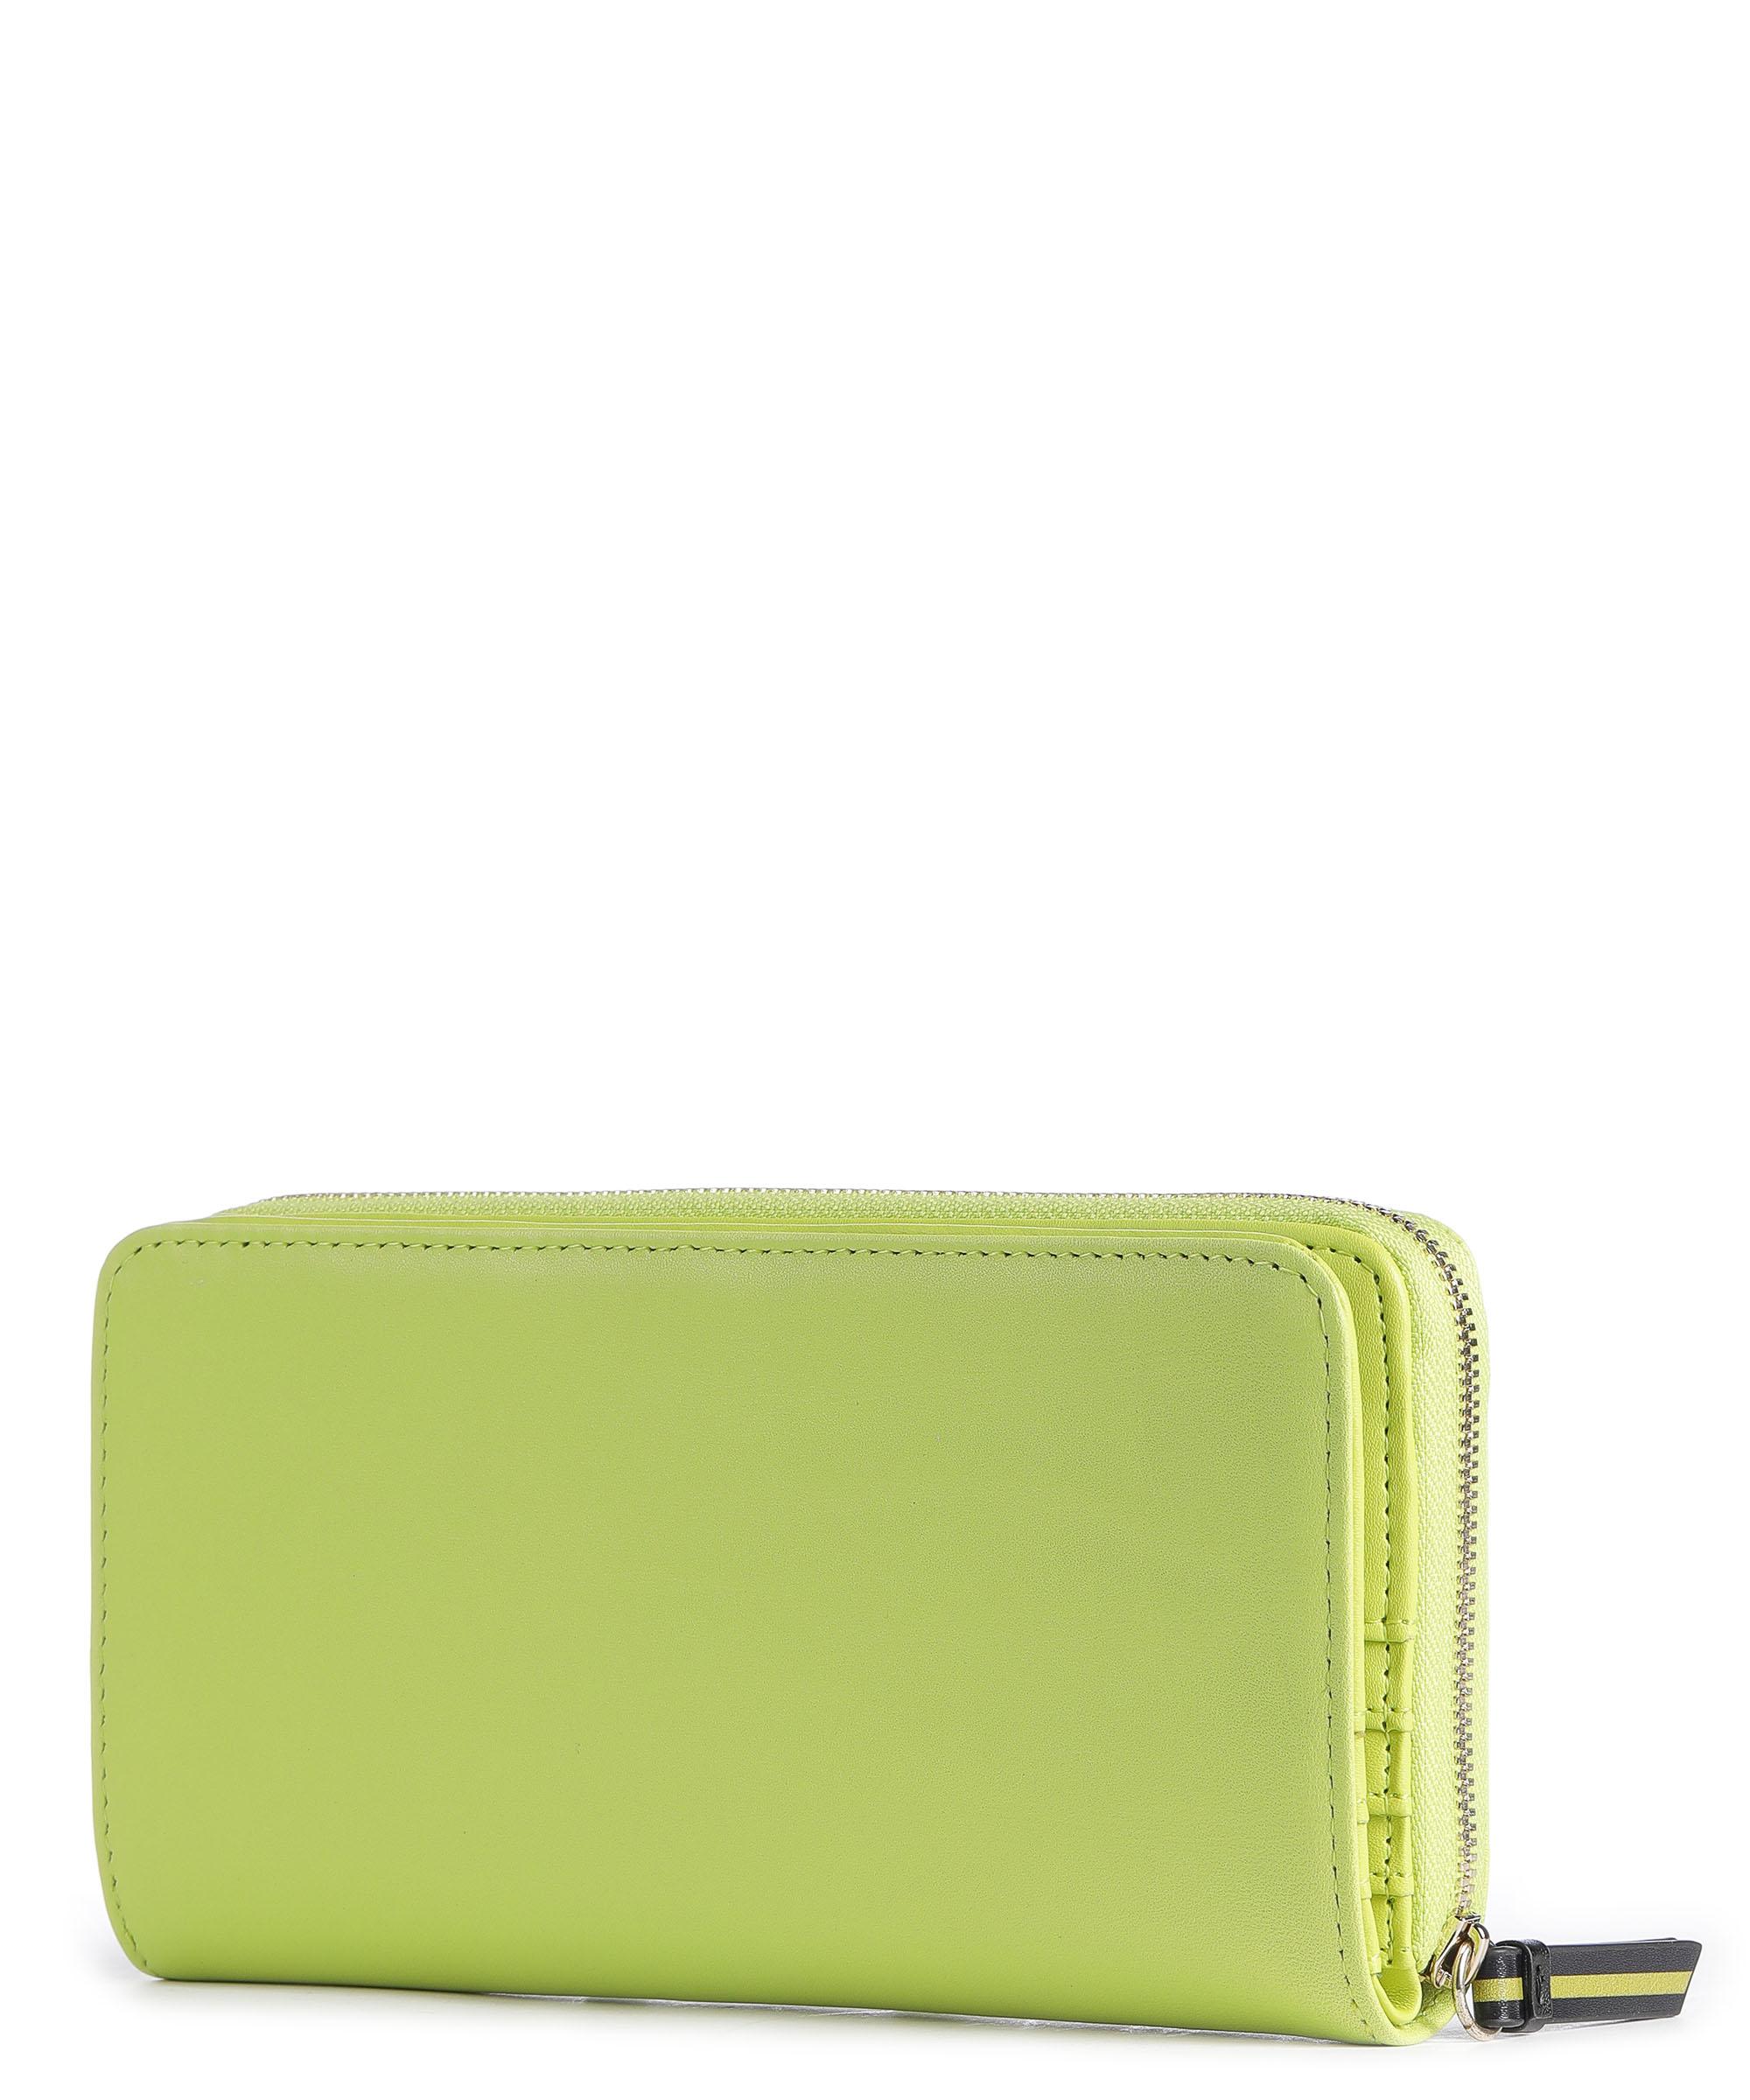 Matte Leather Small Crystal Purse - ROZZA - Light Green by TED BAKER |  jellibeans